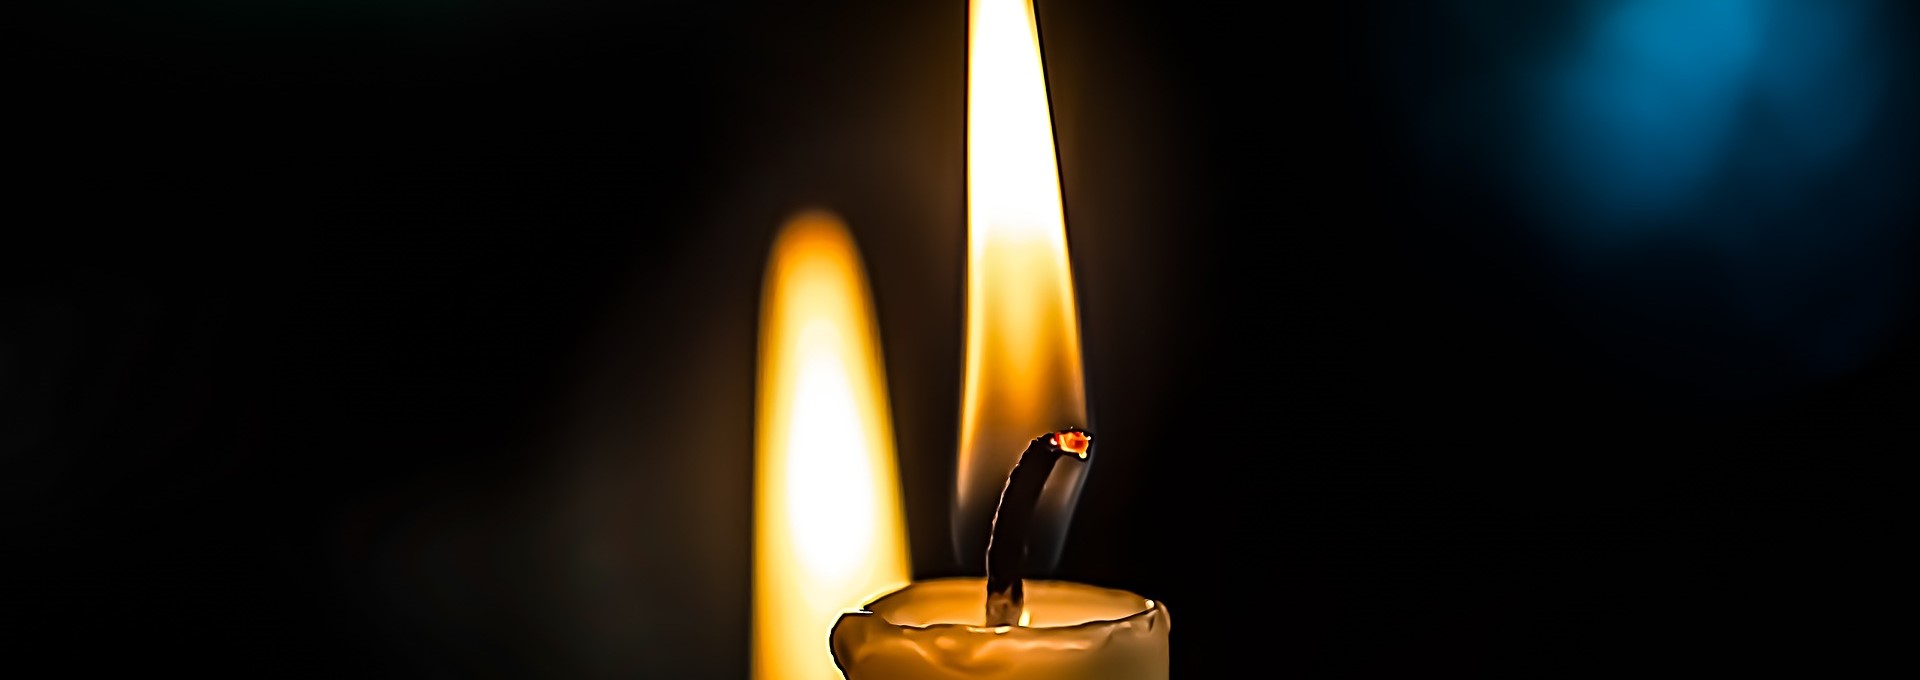 There are 2 ways of spreading light; to be the candle that spreads it or the mirror that reflects it